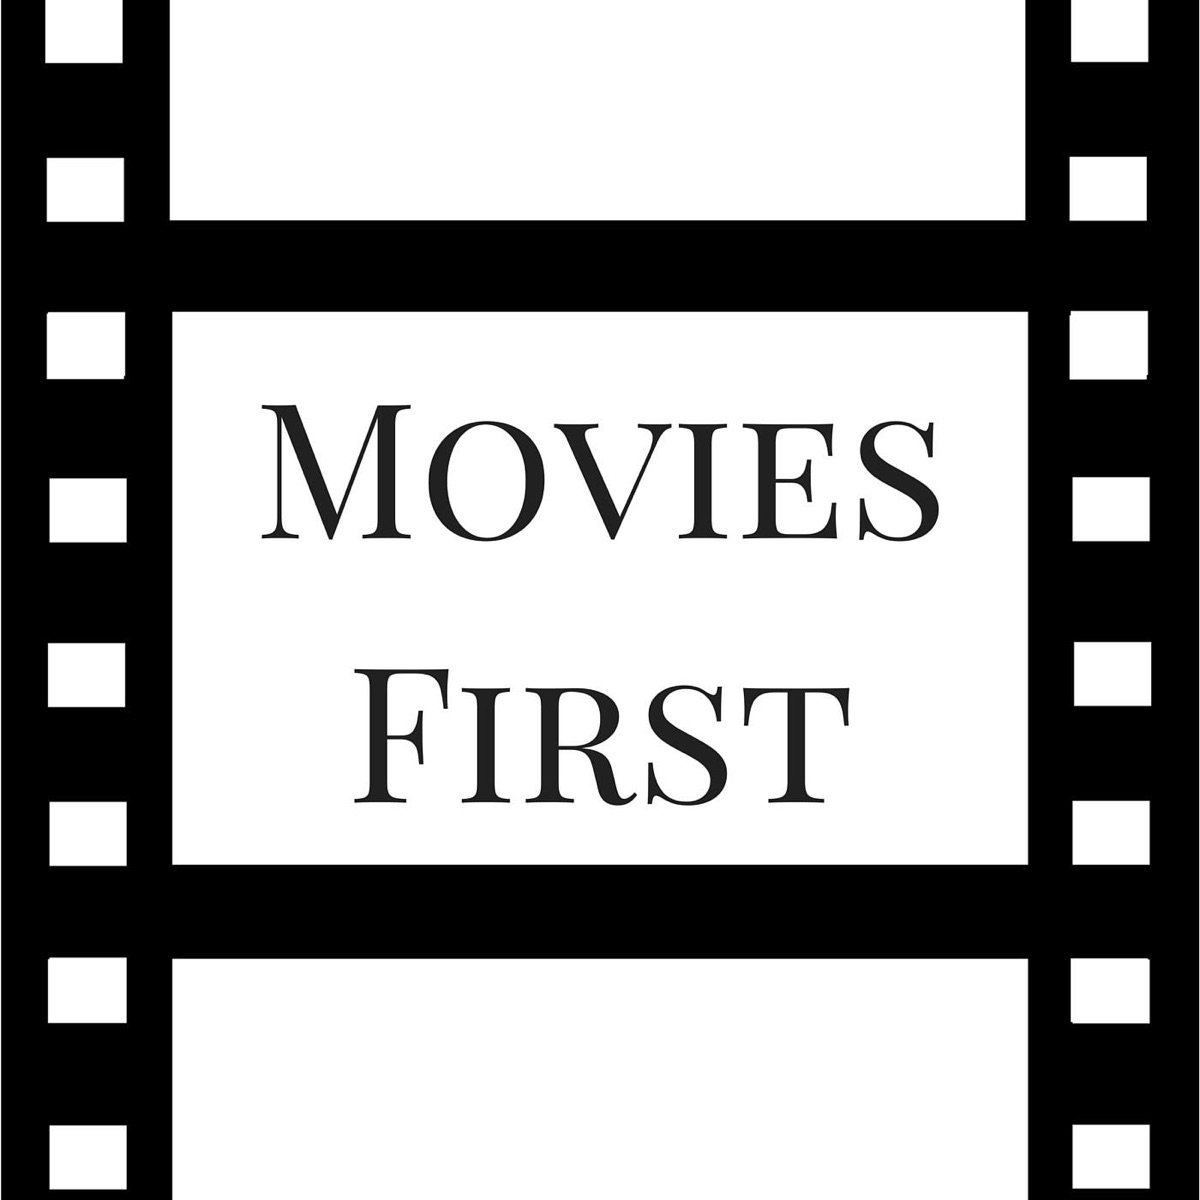 Your movies 1